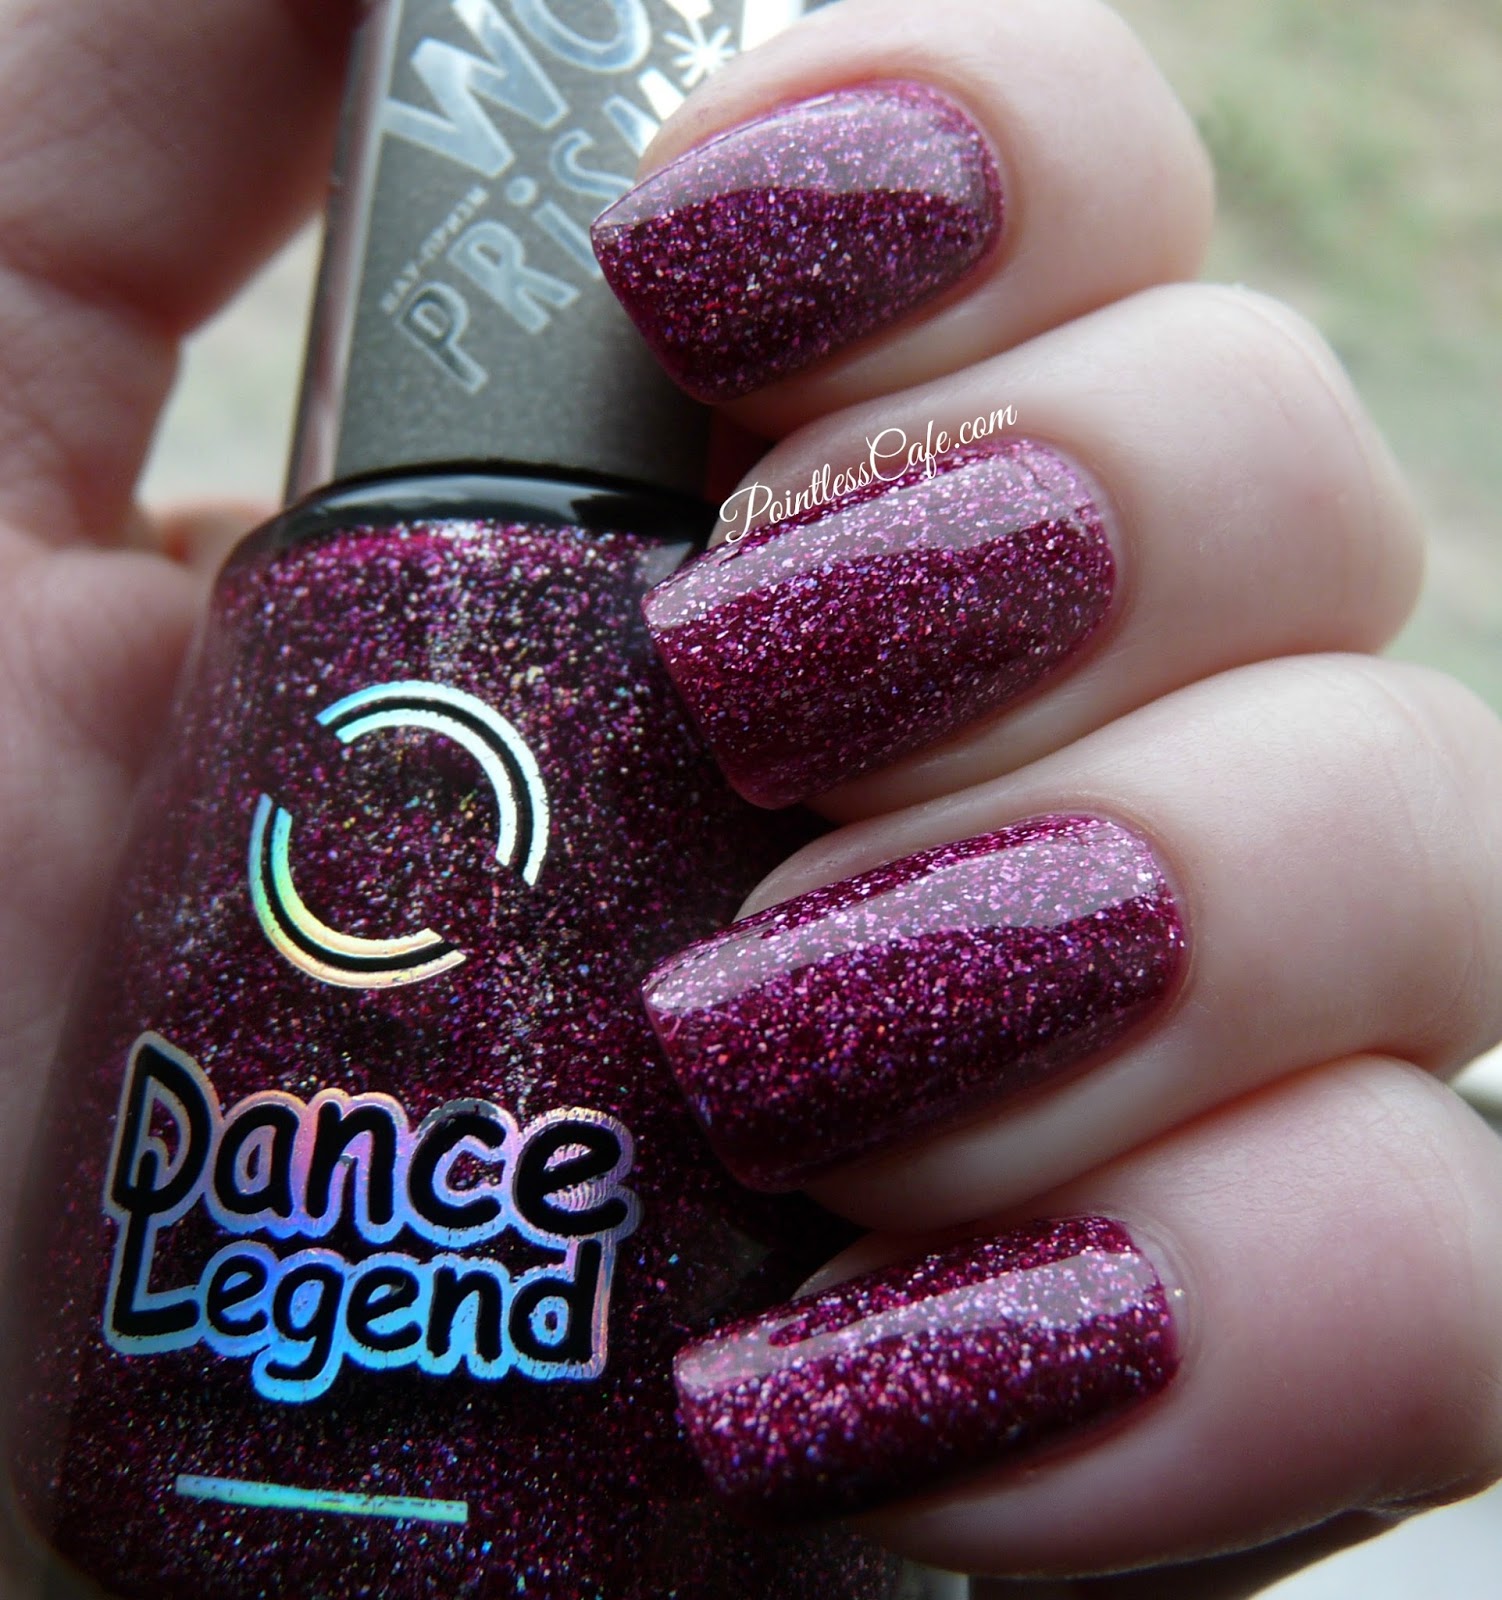 Dance Legend WOW Prisms - Swatches and Review | Pointless Cafe